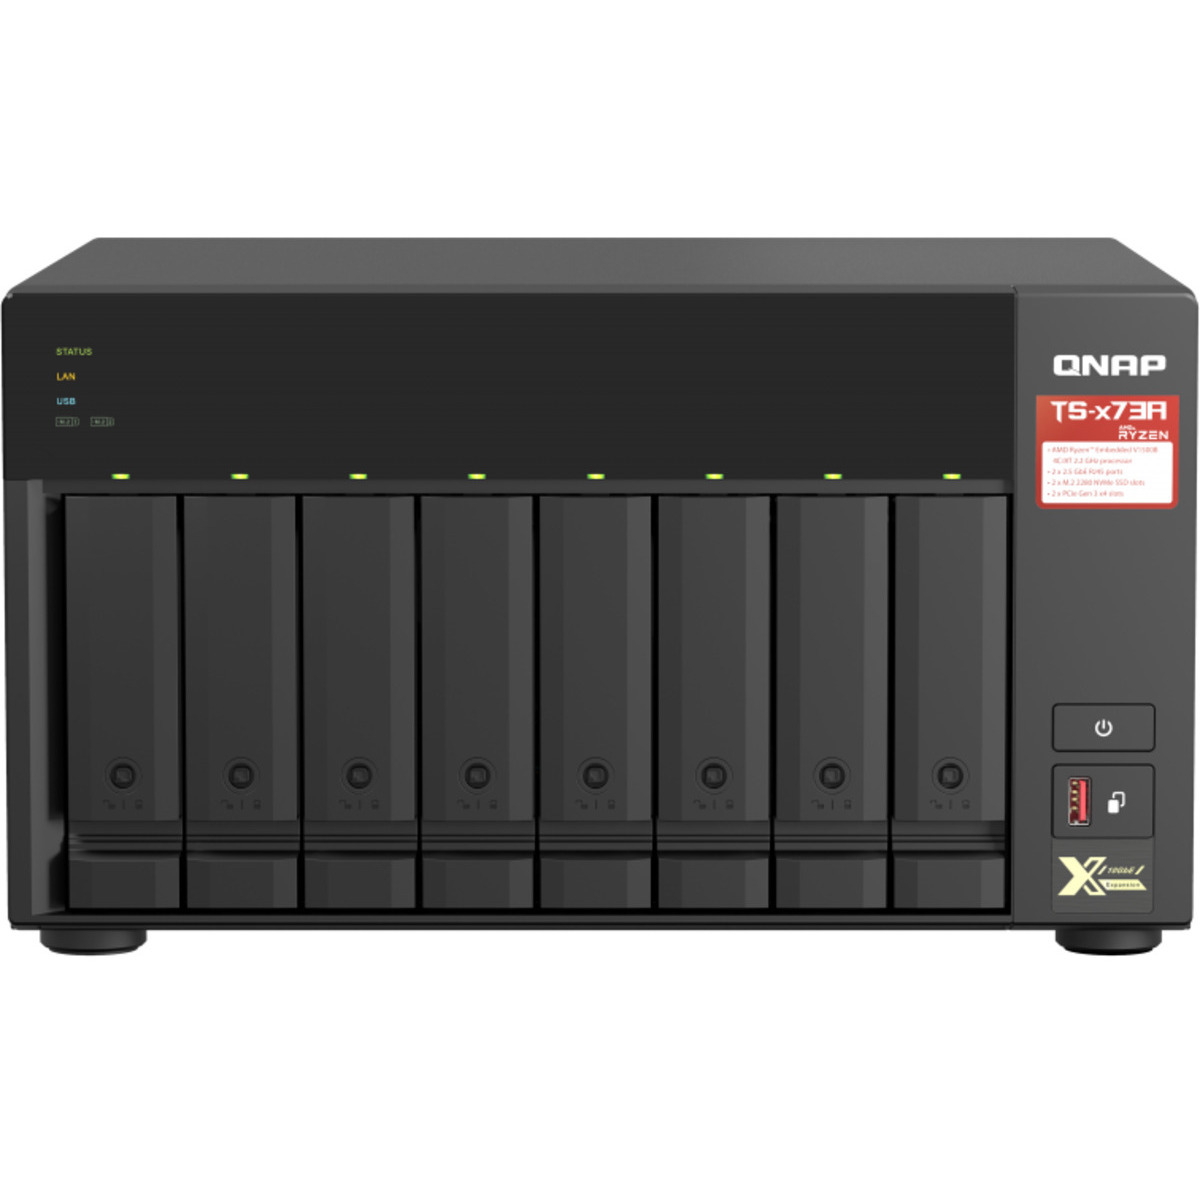 QNAP TS-873A 20tb 8-Bay Desktop Multimedia / Power User / Business NAS - Network Attached Storage Device 5x4tb Western Digital Red SA500 WDS400T1R0A 2.5 560/530MB/s SATA 6Gb/s SSD NAS Class Drives Installed - Burn-In Tested TS-873A